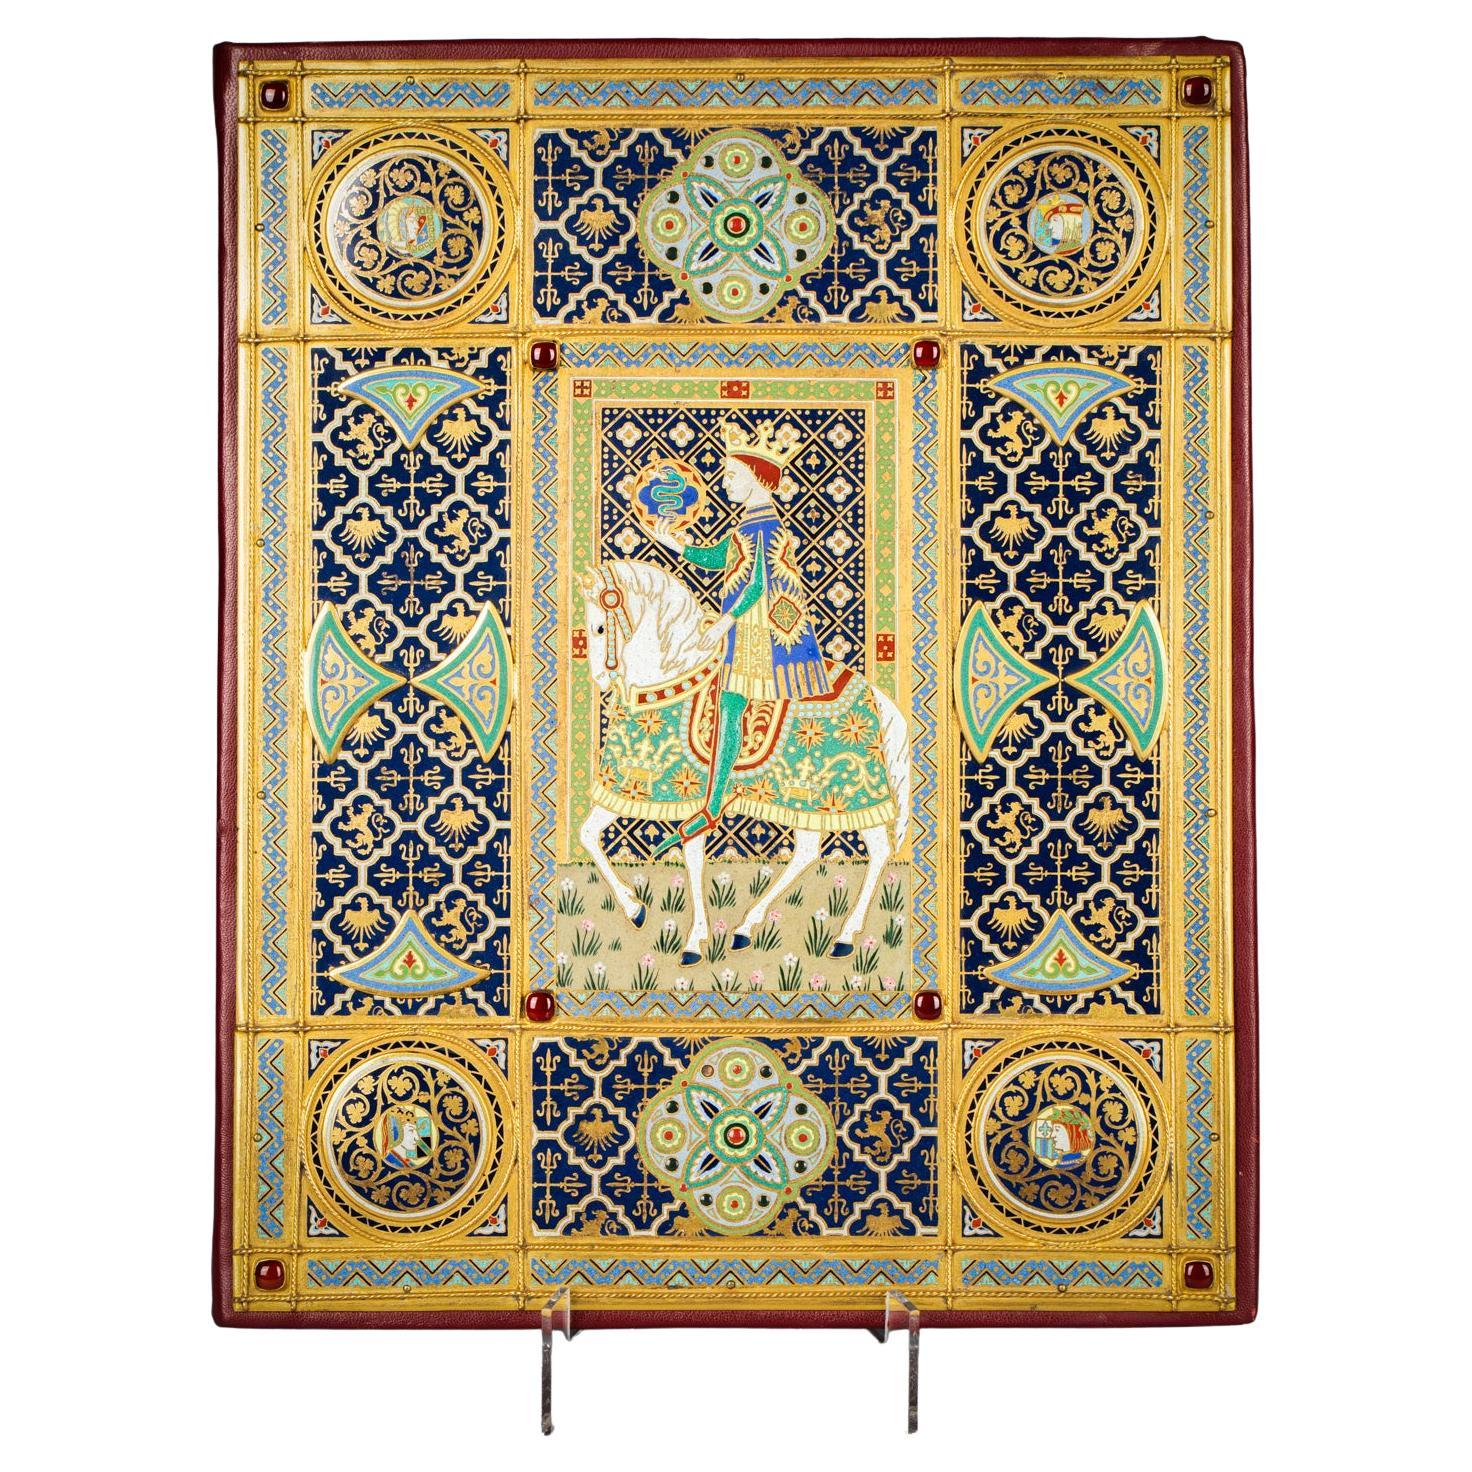 E.F. Caldwell Champlevé Enamel and Jeweled Folio Cover, Early 20th Century